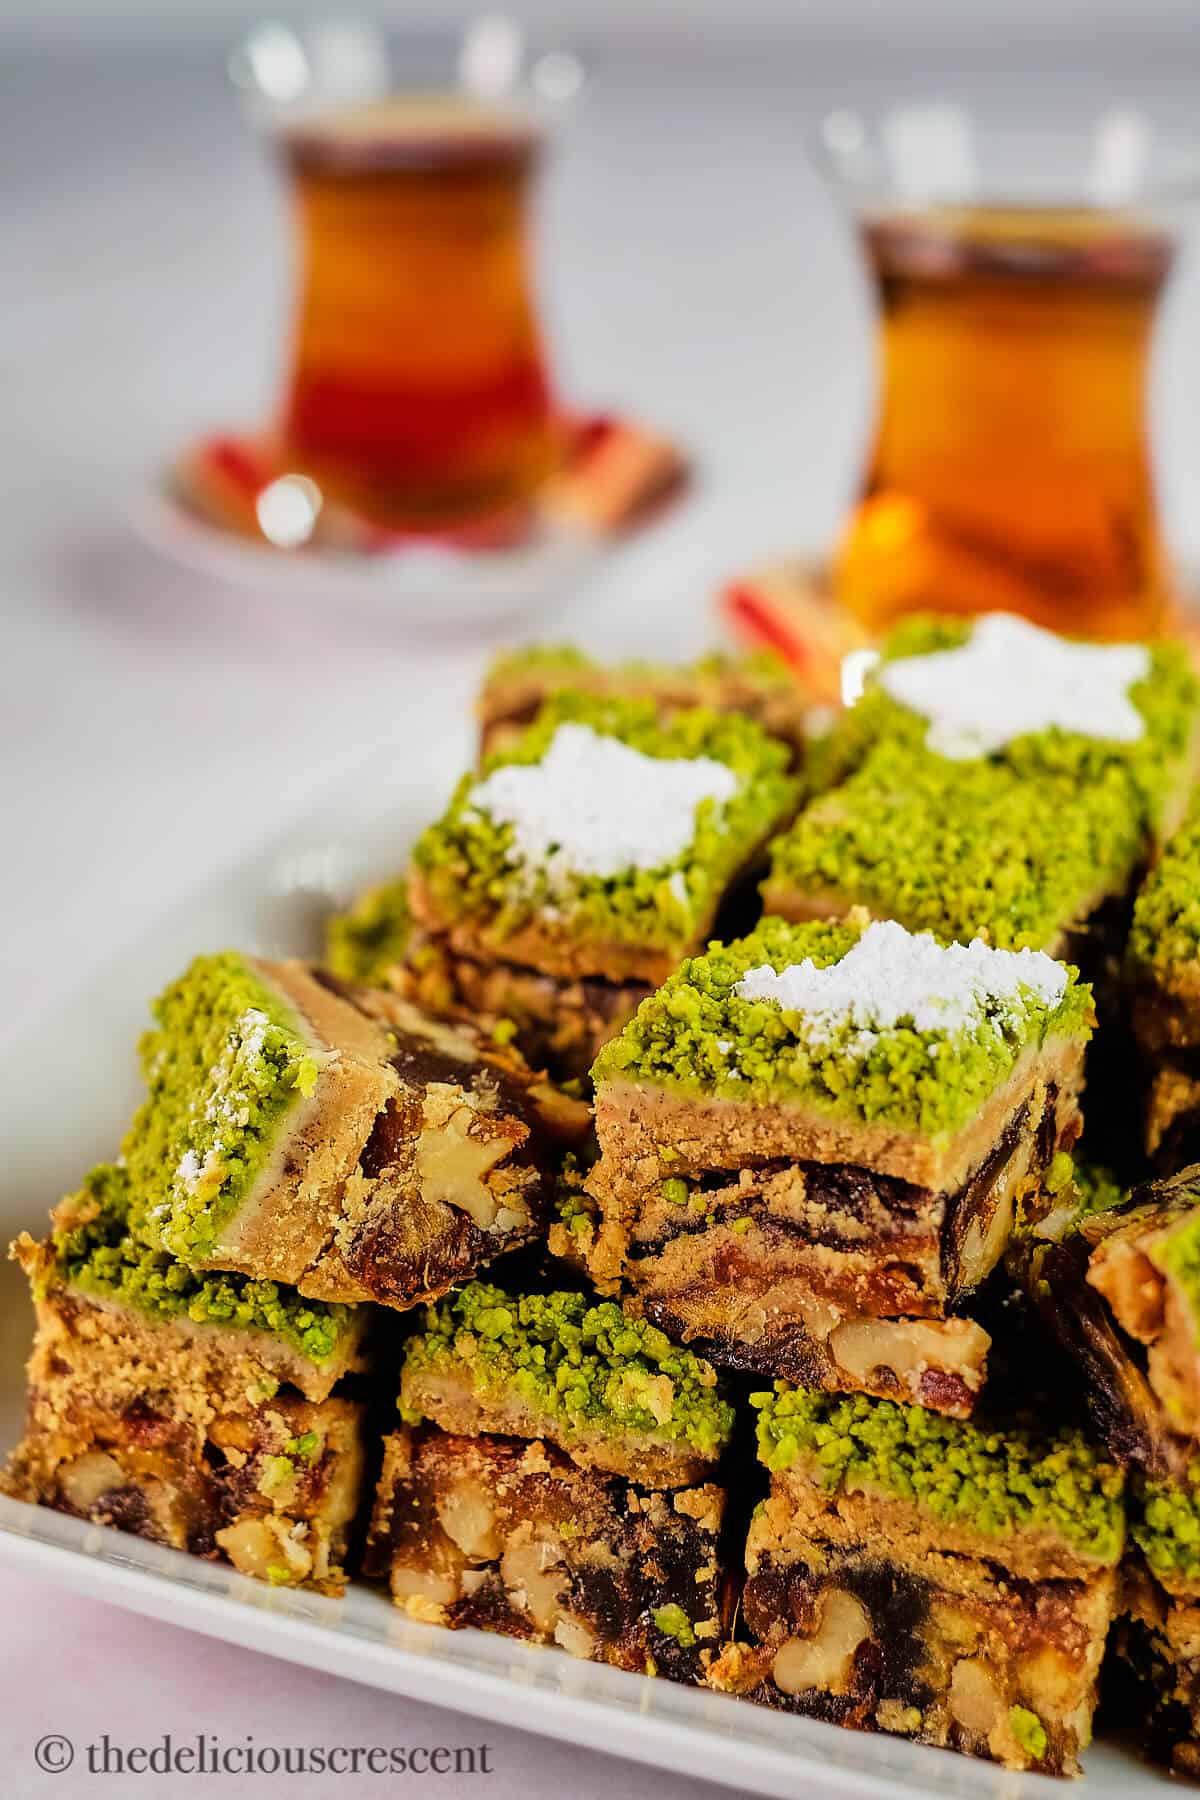 Persian date dessert stuffed with walnuts and cut into squares.